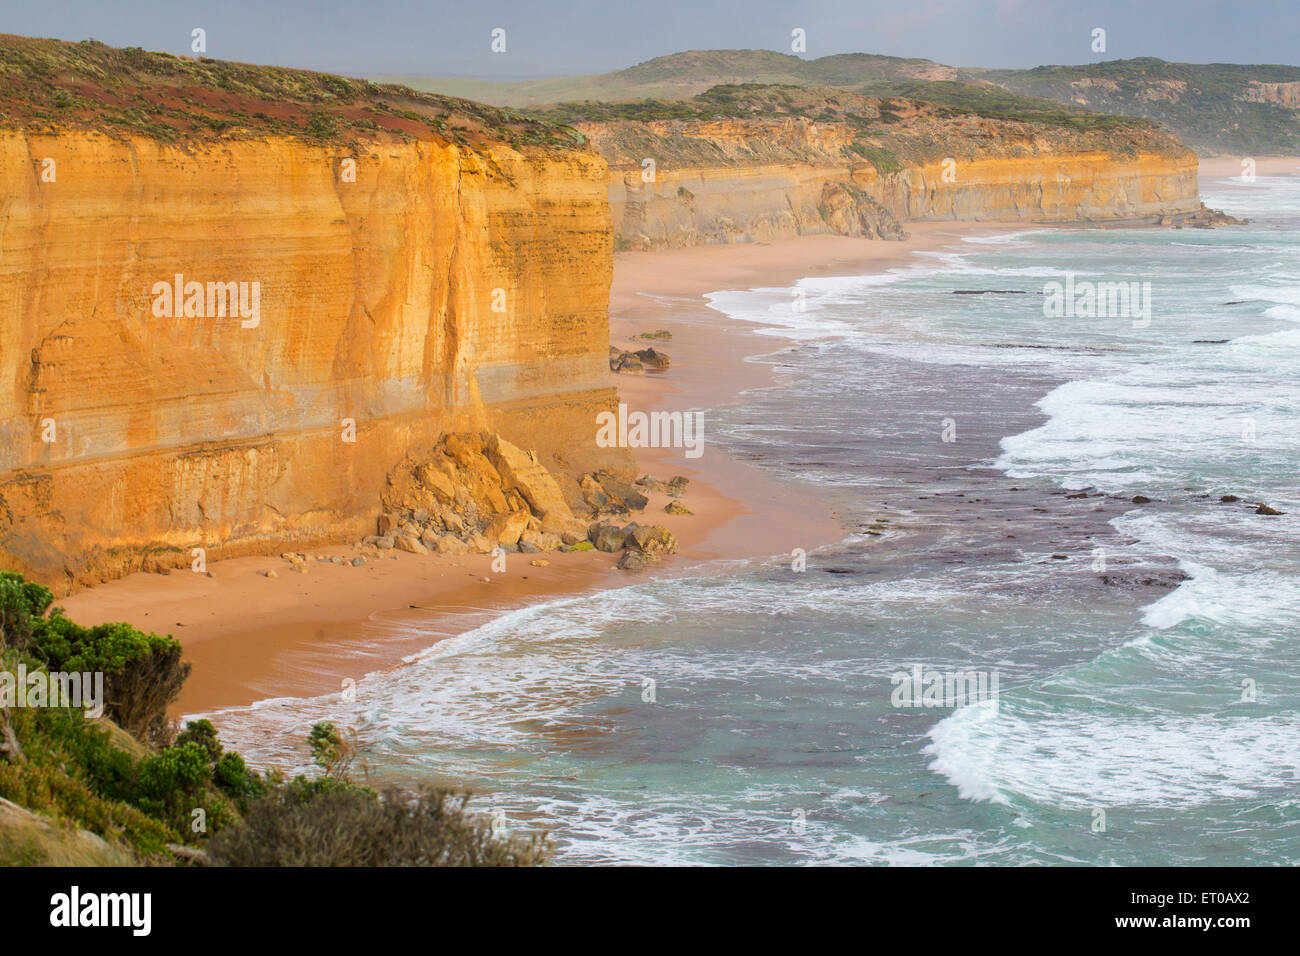 Rugged sandstone cliffs and rough waves near Port Campbell, Great Ocean Road, Victoria, Australia Stock Photo